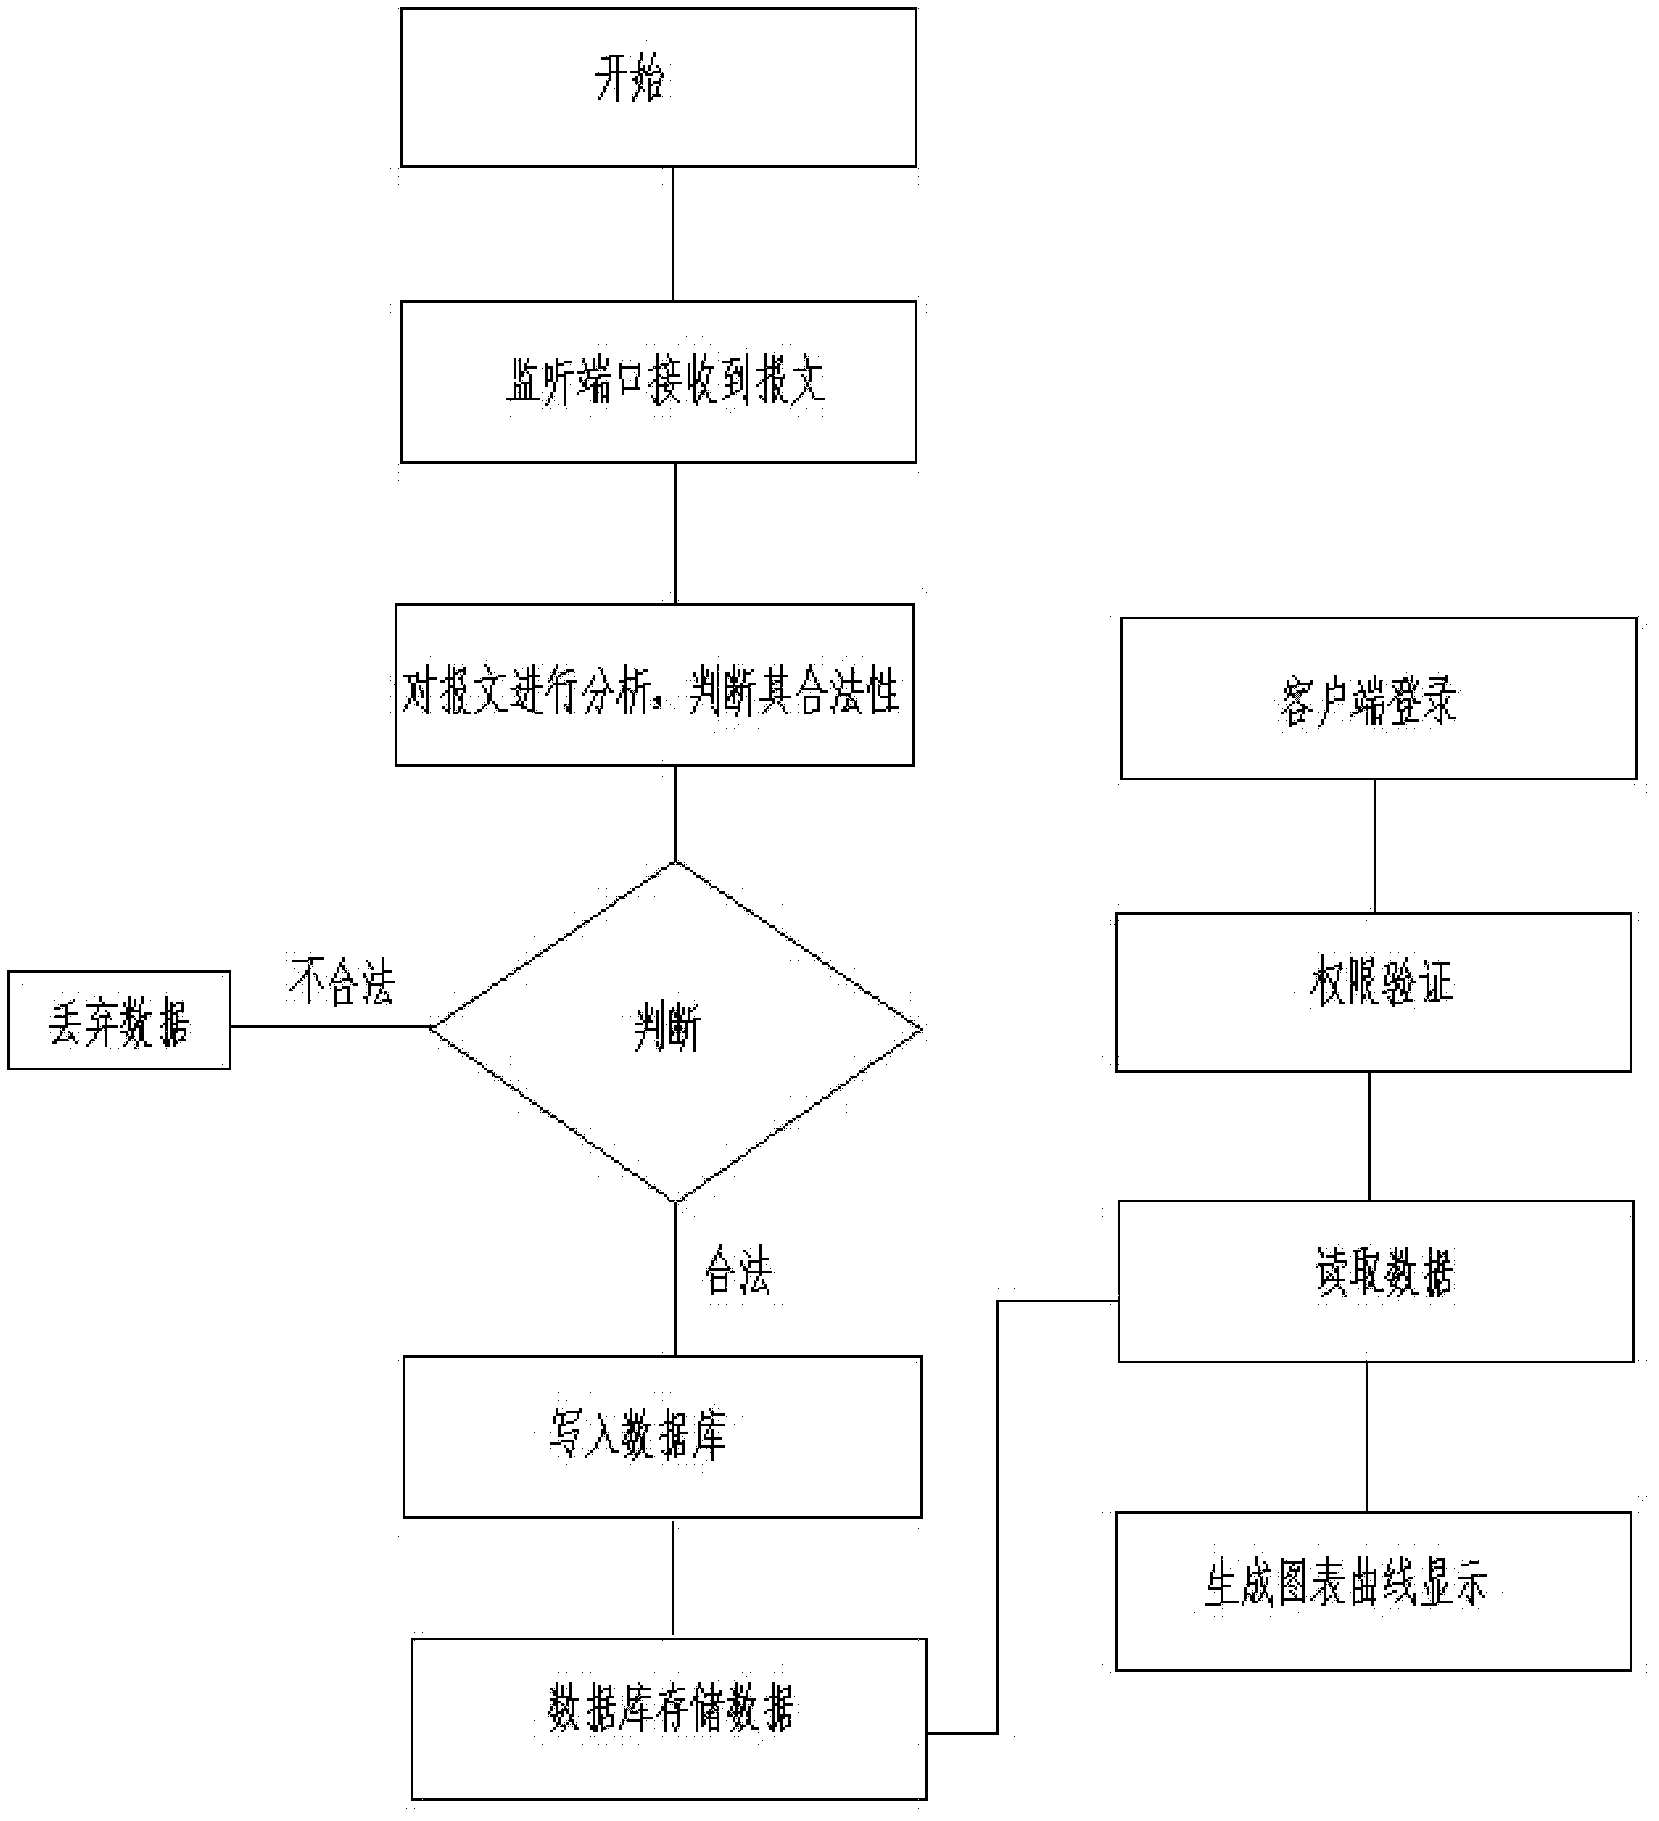 Device and method for automatically processing water quality monitoring data